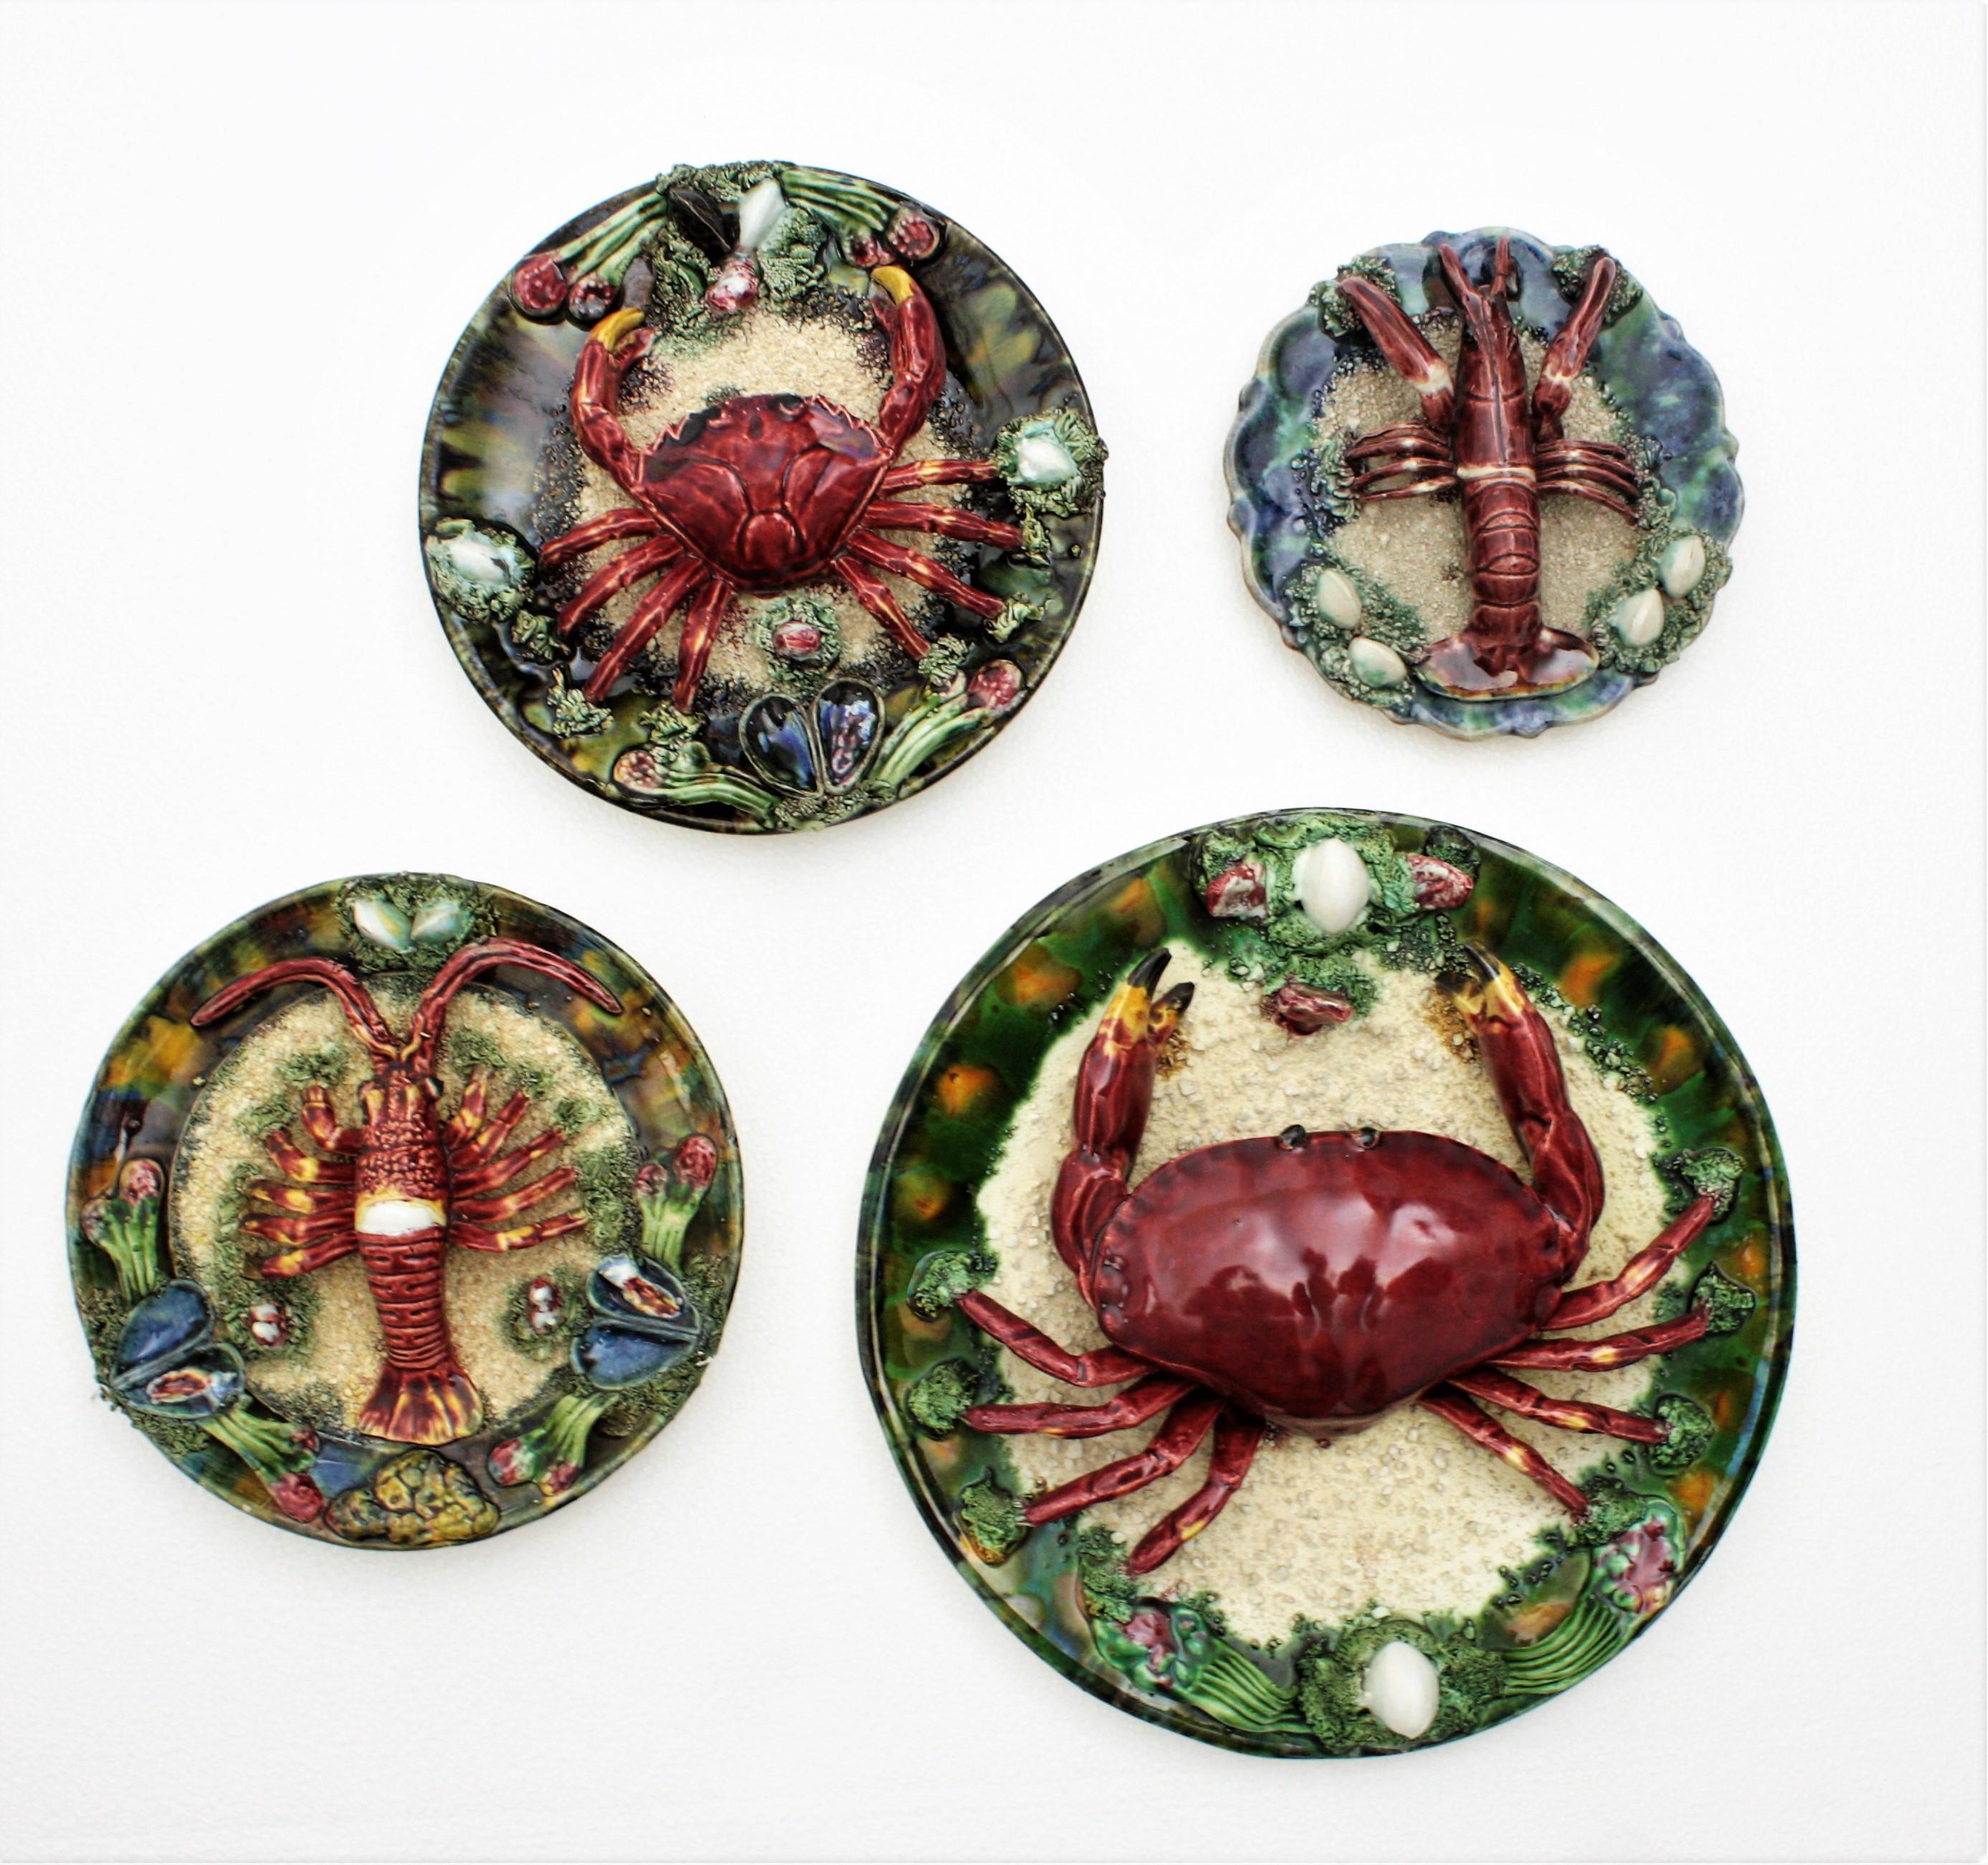 A colorful wall decoration comprised by four excellent Majolica glazed ceramic pieces with seafood trompe l'oeil decorations. Portugal, 1940s-1950s.
Such a realistic representation with crabs and lobsters on a sea landscape background. A cool